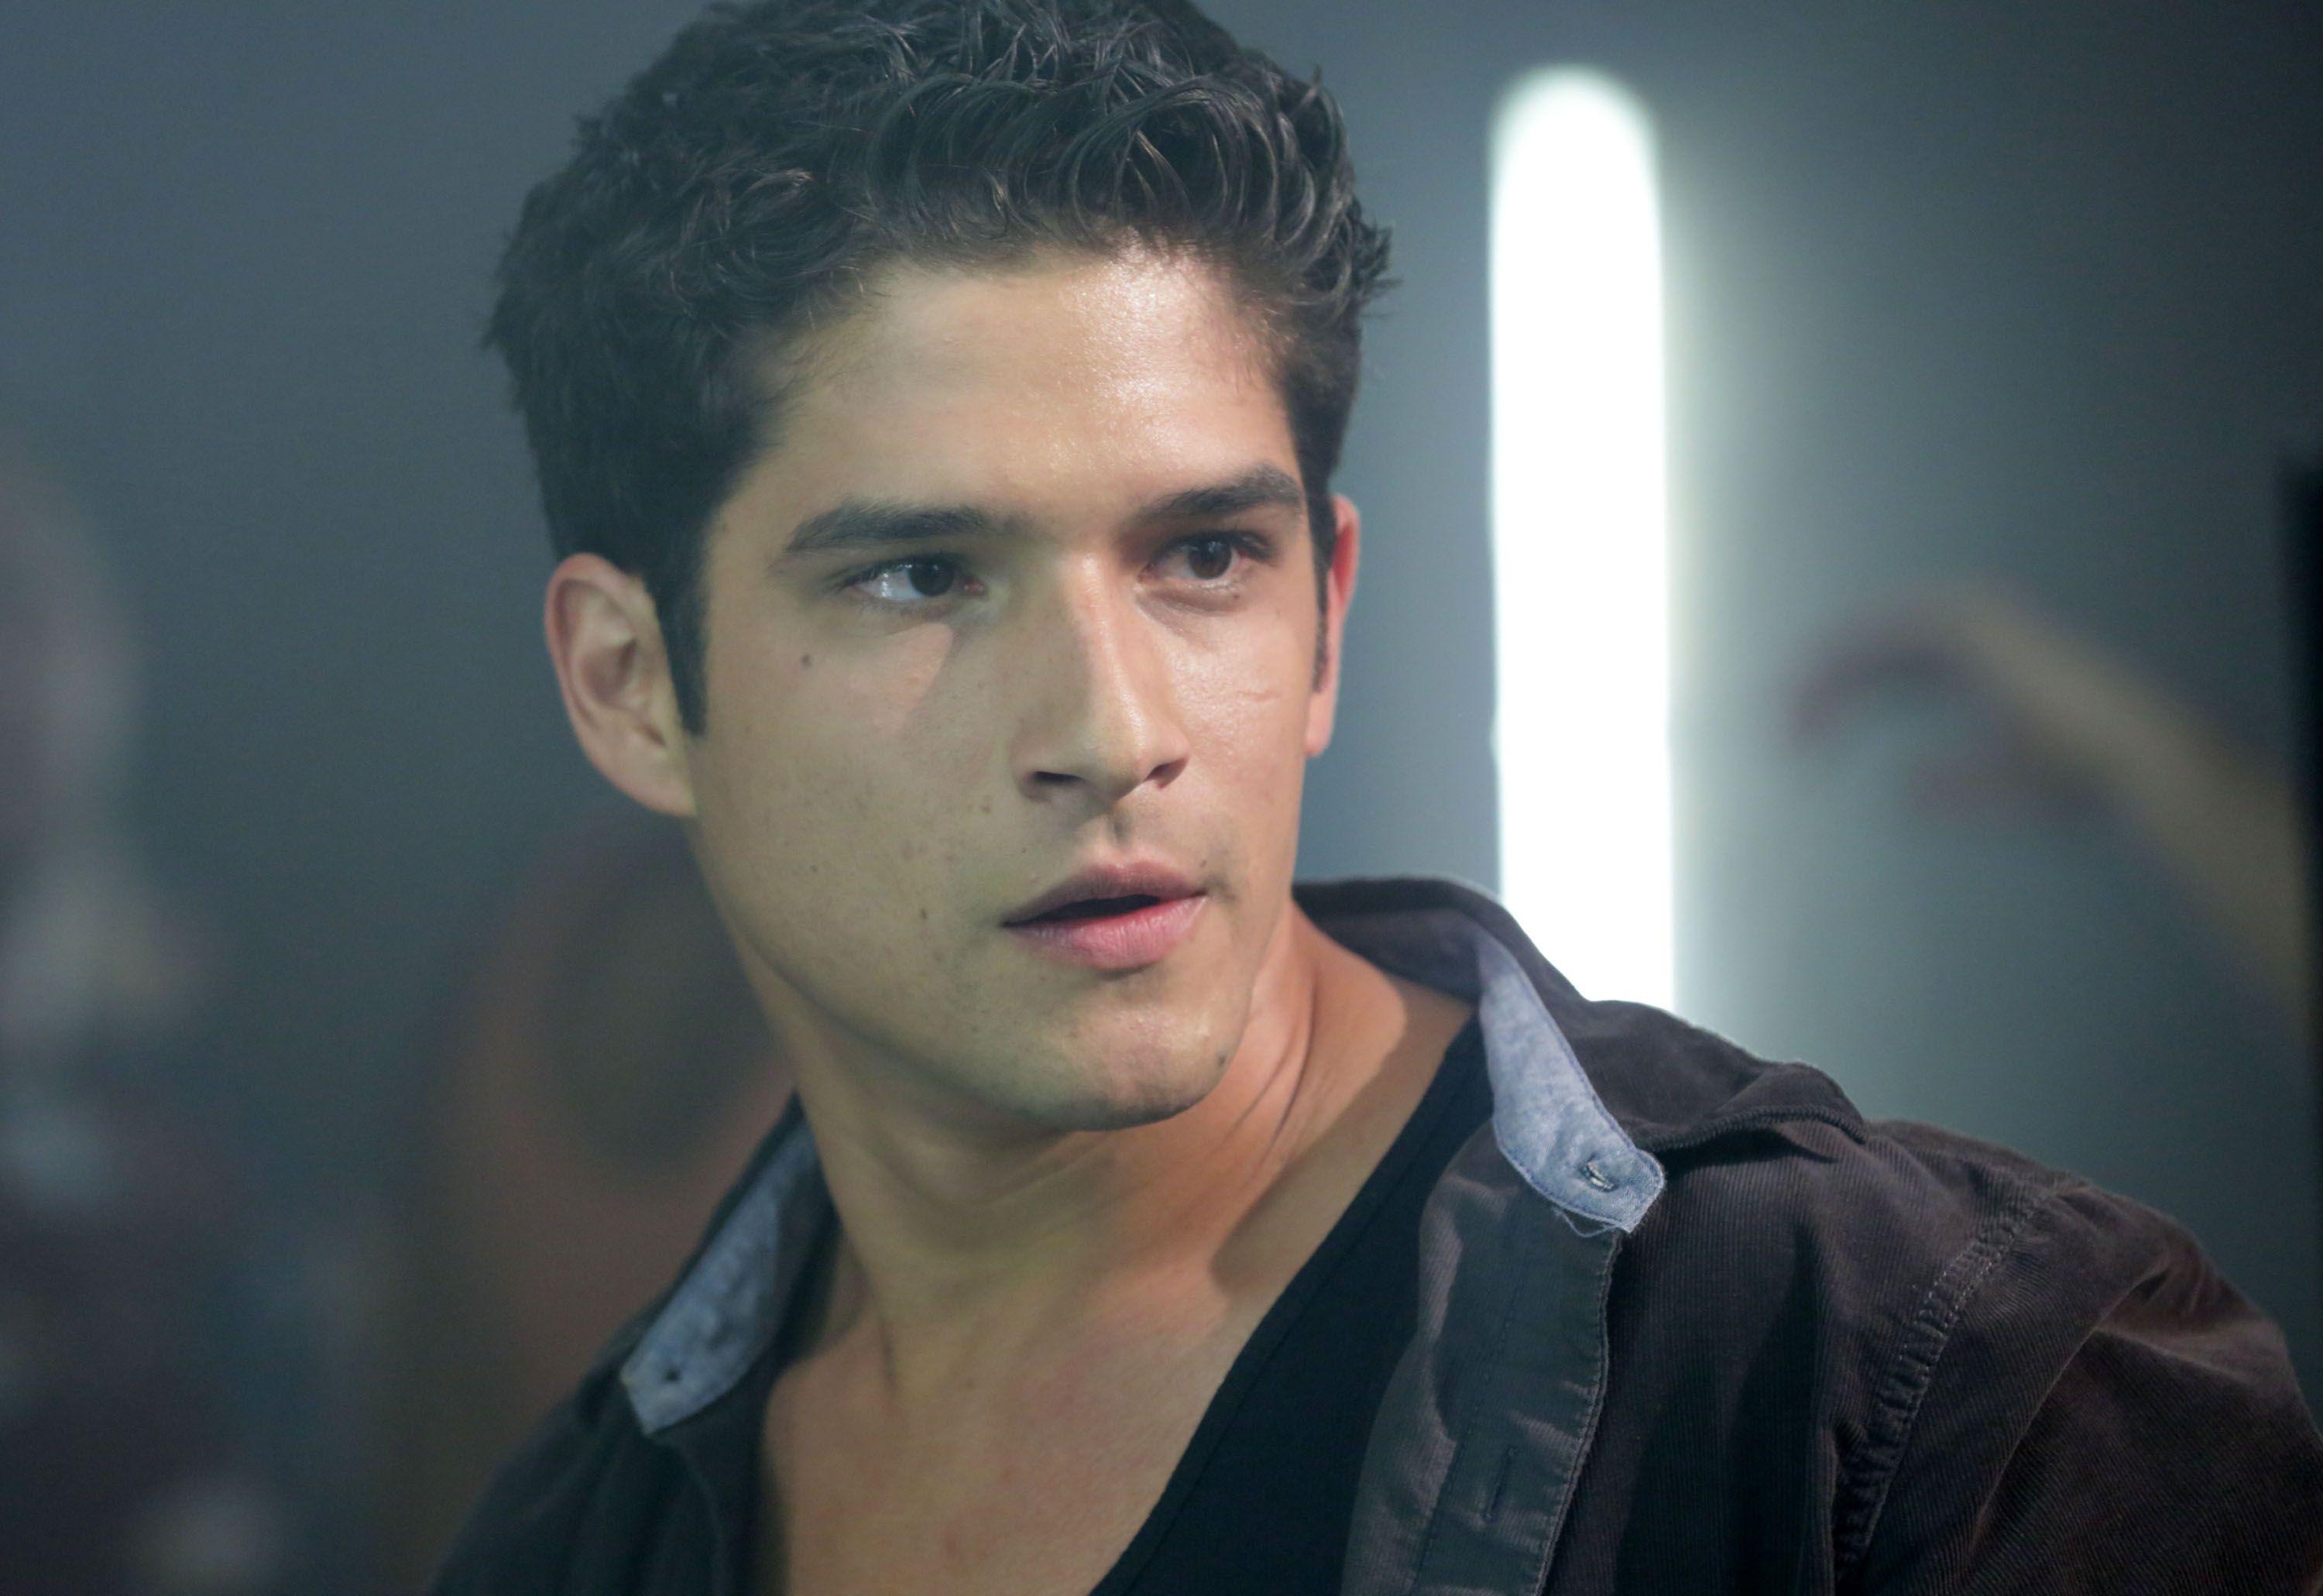 We had no idea that Teen Wolf's Tyler Posey once played Jennifer